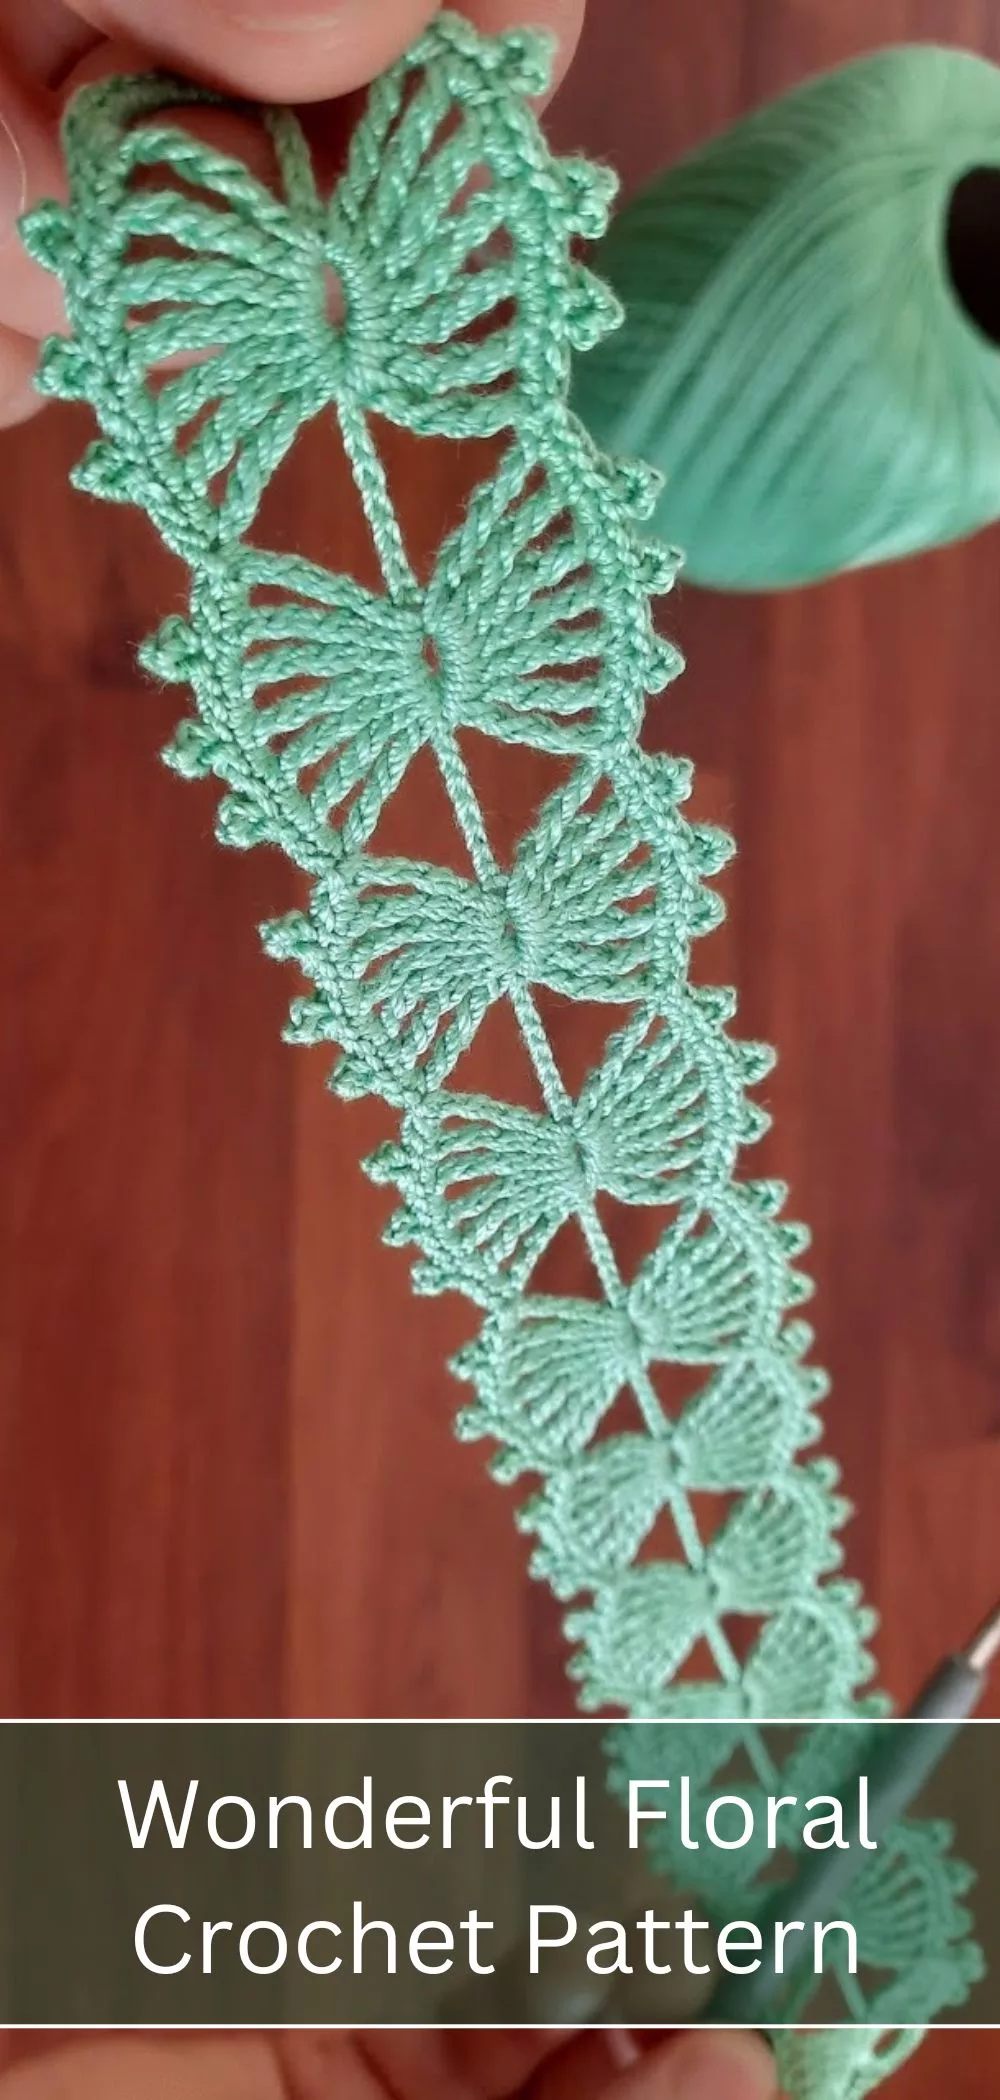 Such A Wonderful Floral Crochet Pattern can be done by beginners. You will use simple crochet techniques in this project.